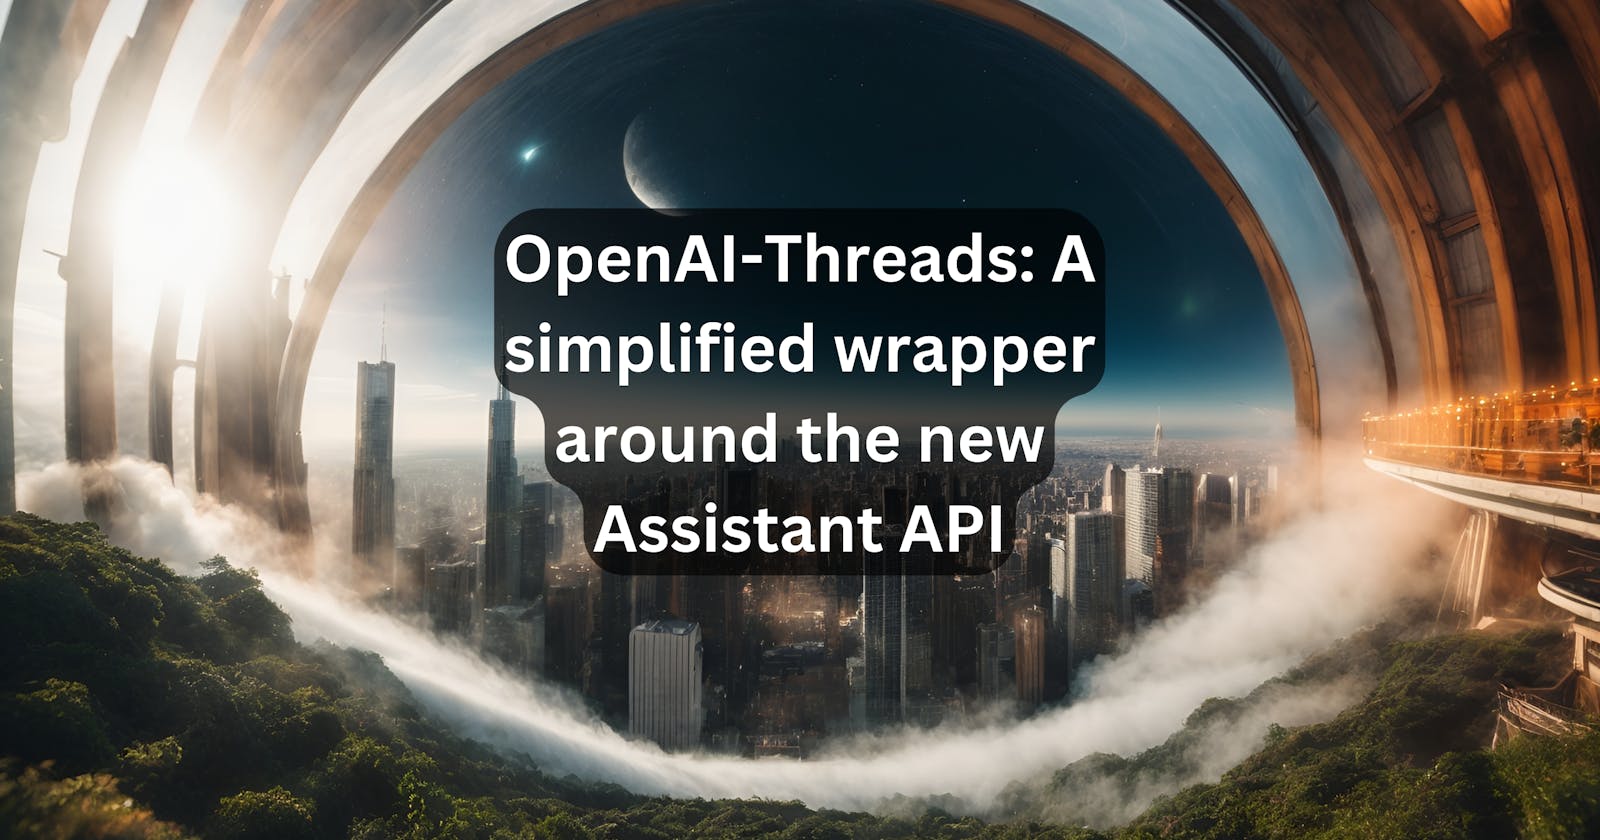 OpenAI-Threads: A simplified wrapper around the new Assistant API